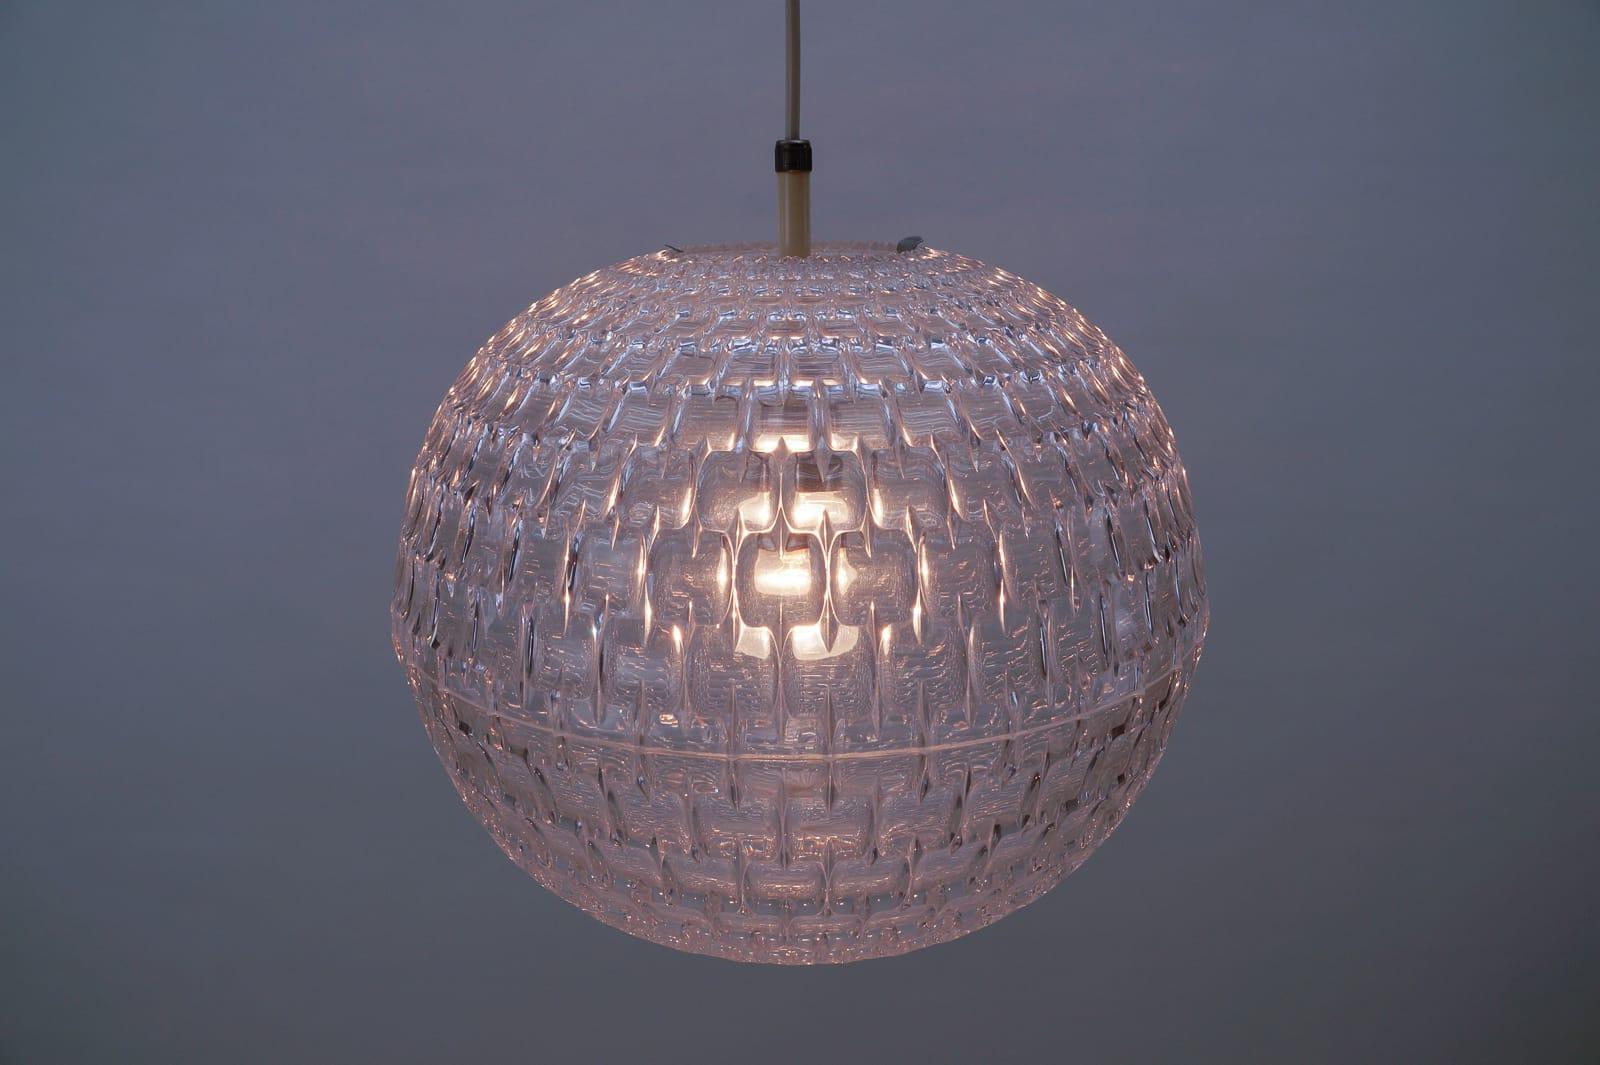 Ceiling lamp by Aloys F. Gangkofner for Erco Leuchten, Germany Lüdenscheid, 1960s.

A very rare, interesting and decorative lamp.

Fully functional.

With an E27 socket. Works with 220V and 110V.

Wiring is suitable for all countries.